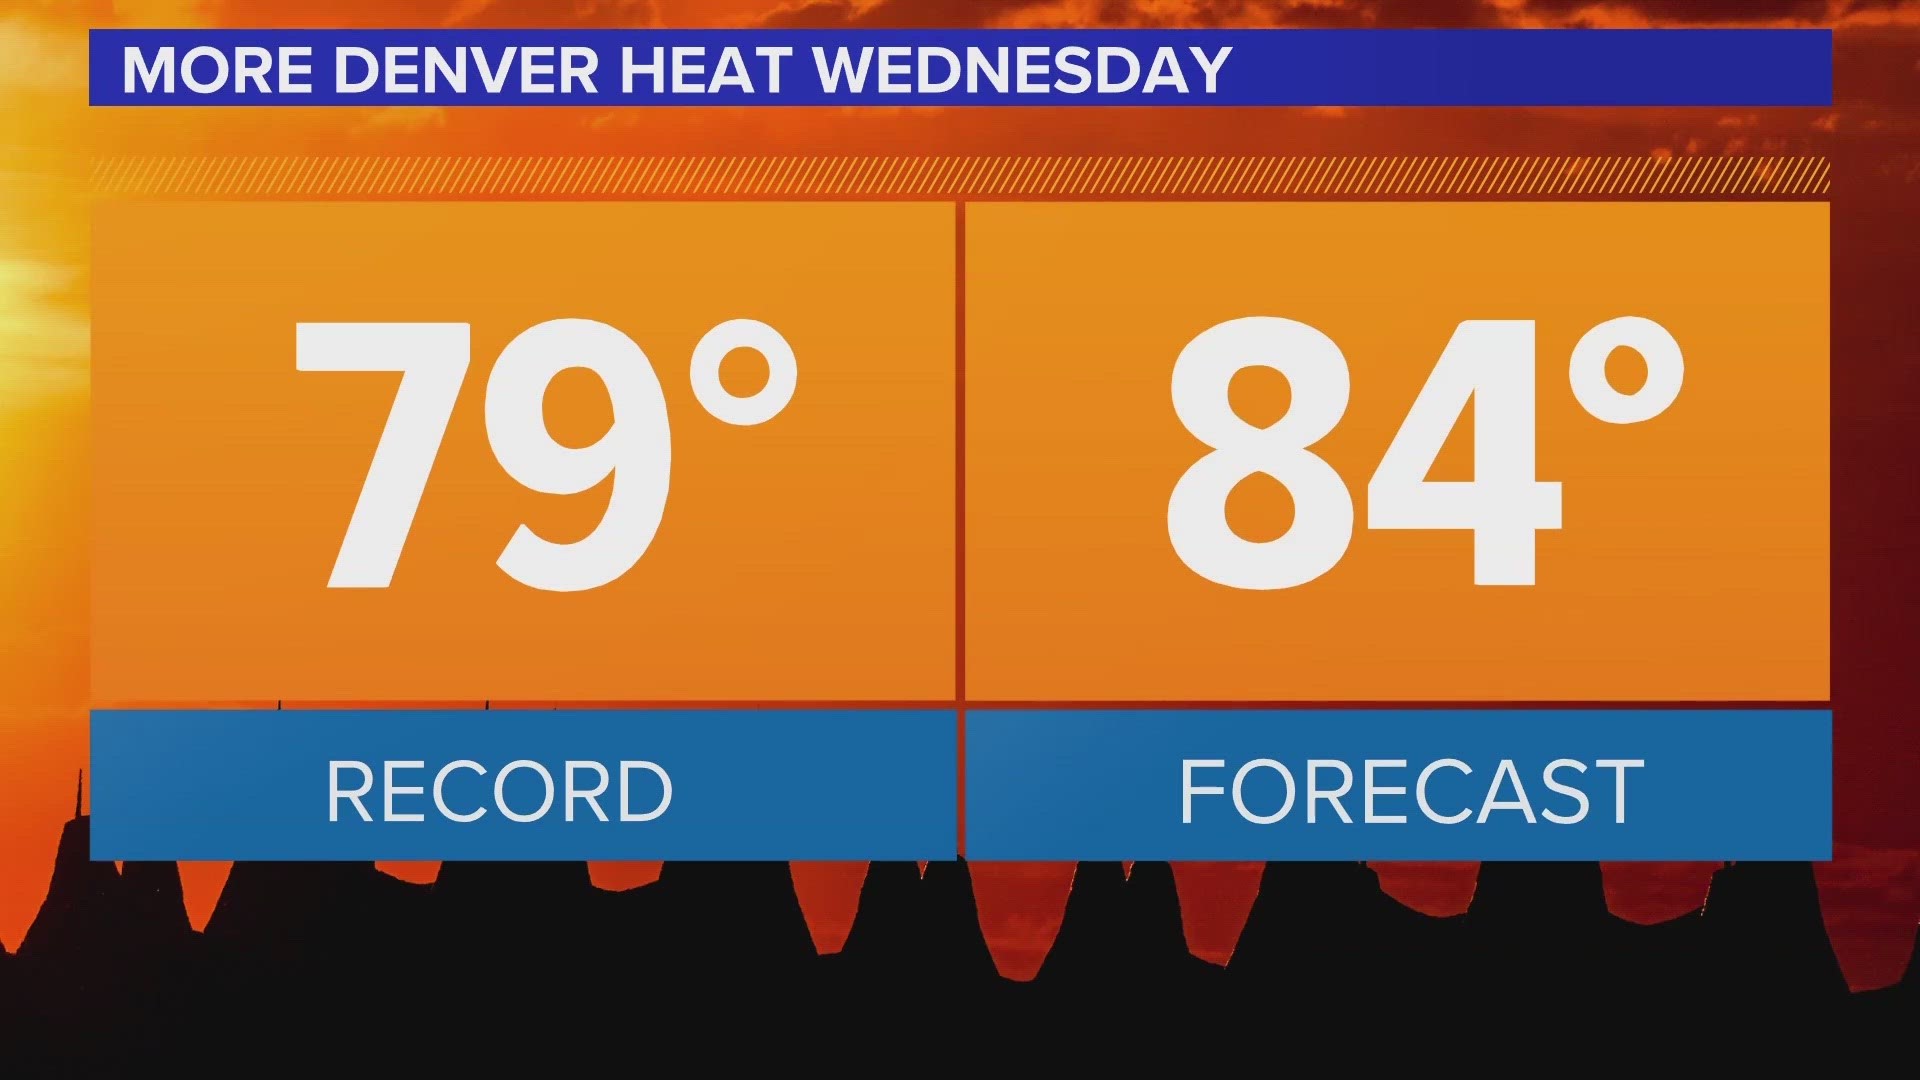 Extreme temperatures with record heat in Denver continues in 2023